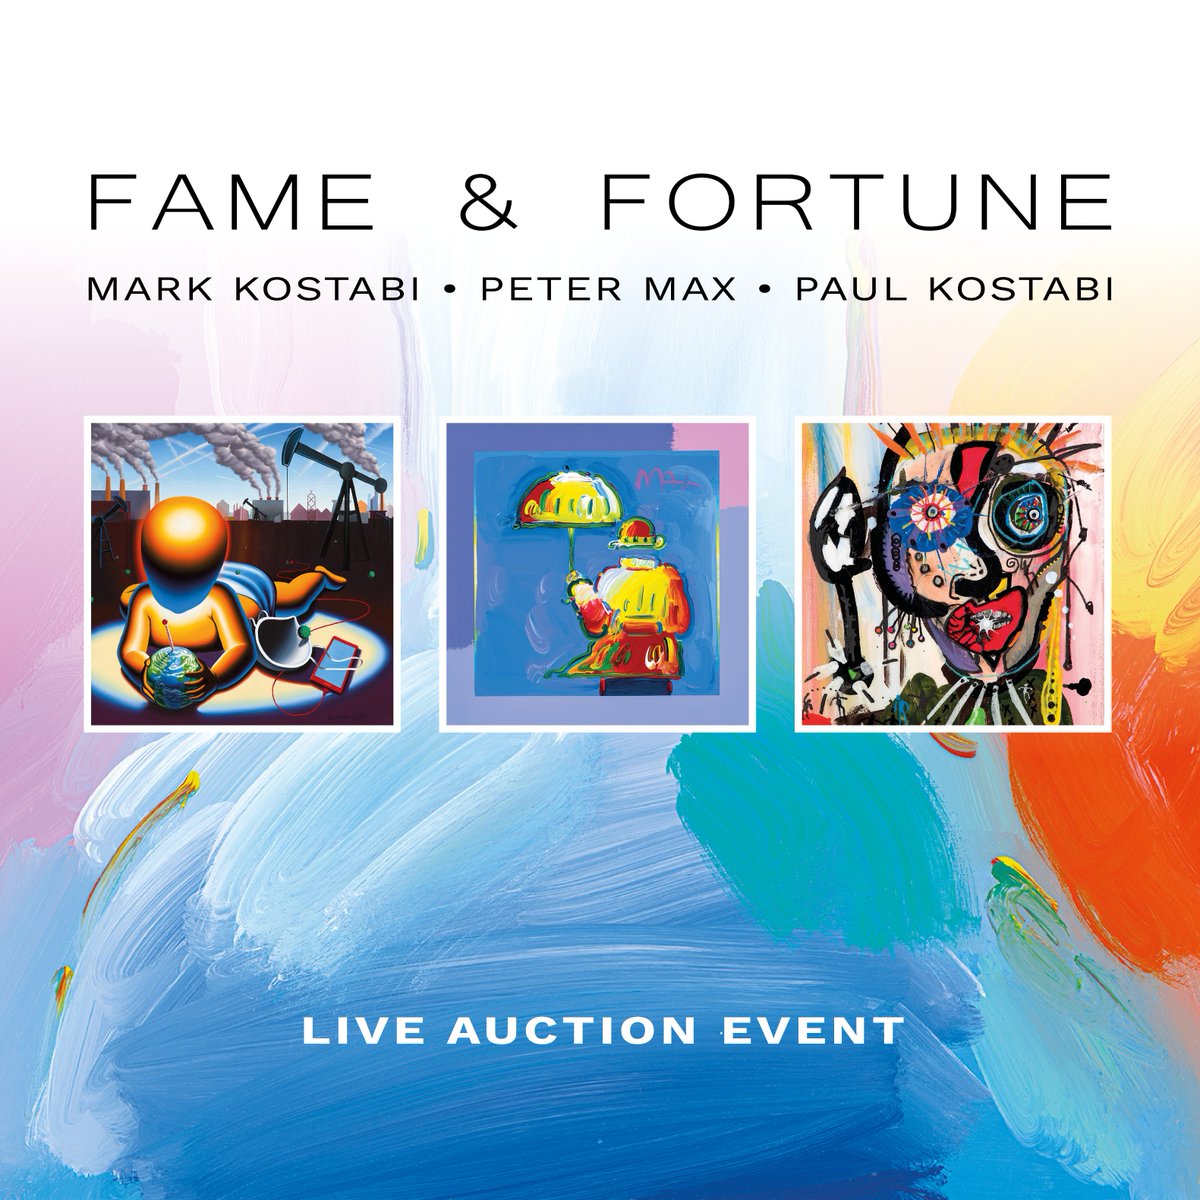 Fame & Fortune: Peter MaX from a visionary Pop artist of the 1960s to a master of Neo-Expressionism. 📅 Date: Thursday, May 9th ⏰ Time: 5-8pm 📍 Location: Park West Gallery, 411 W Broadway, New York RSVP: soho@parkwestgallery.com #ParkWestGallery #FameandFortune #PeterMax